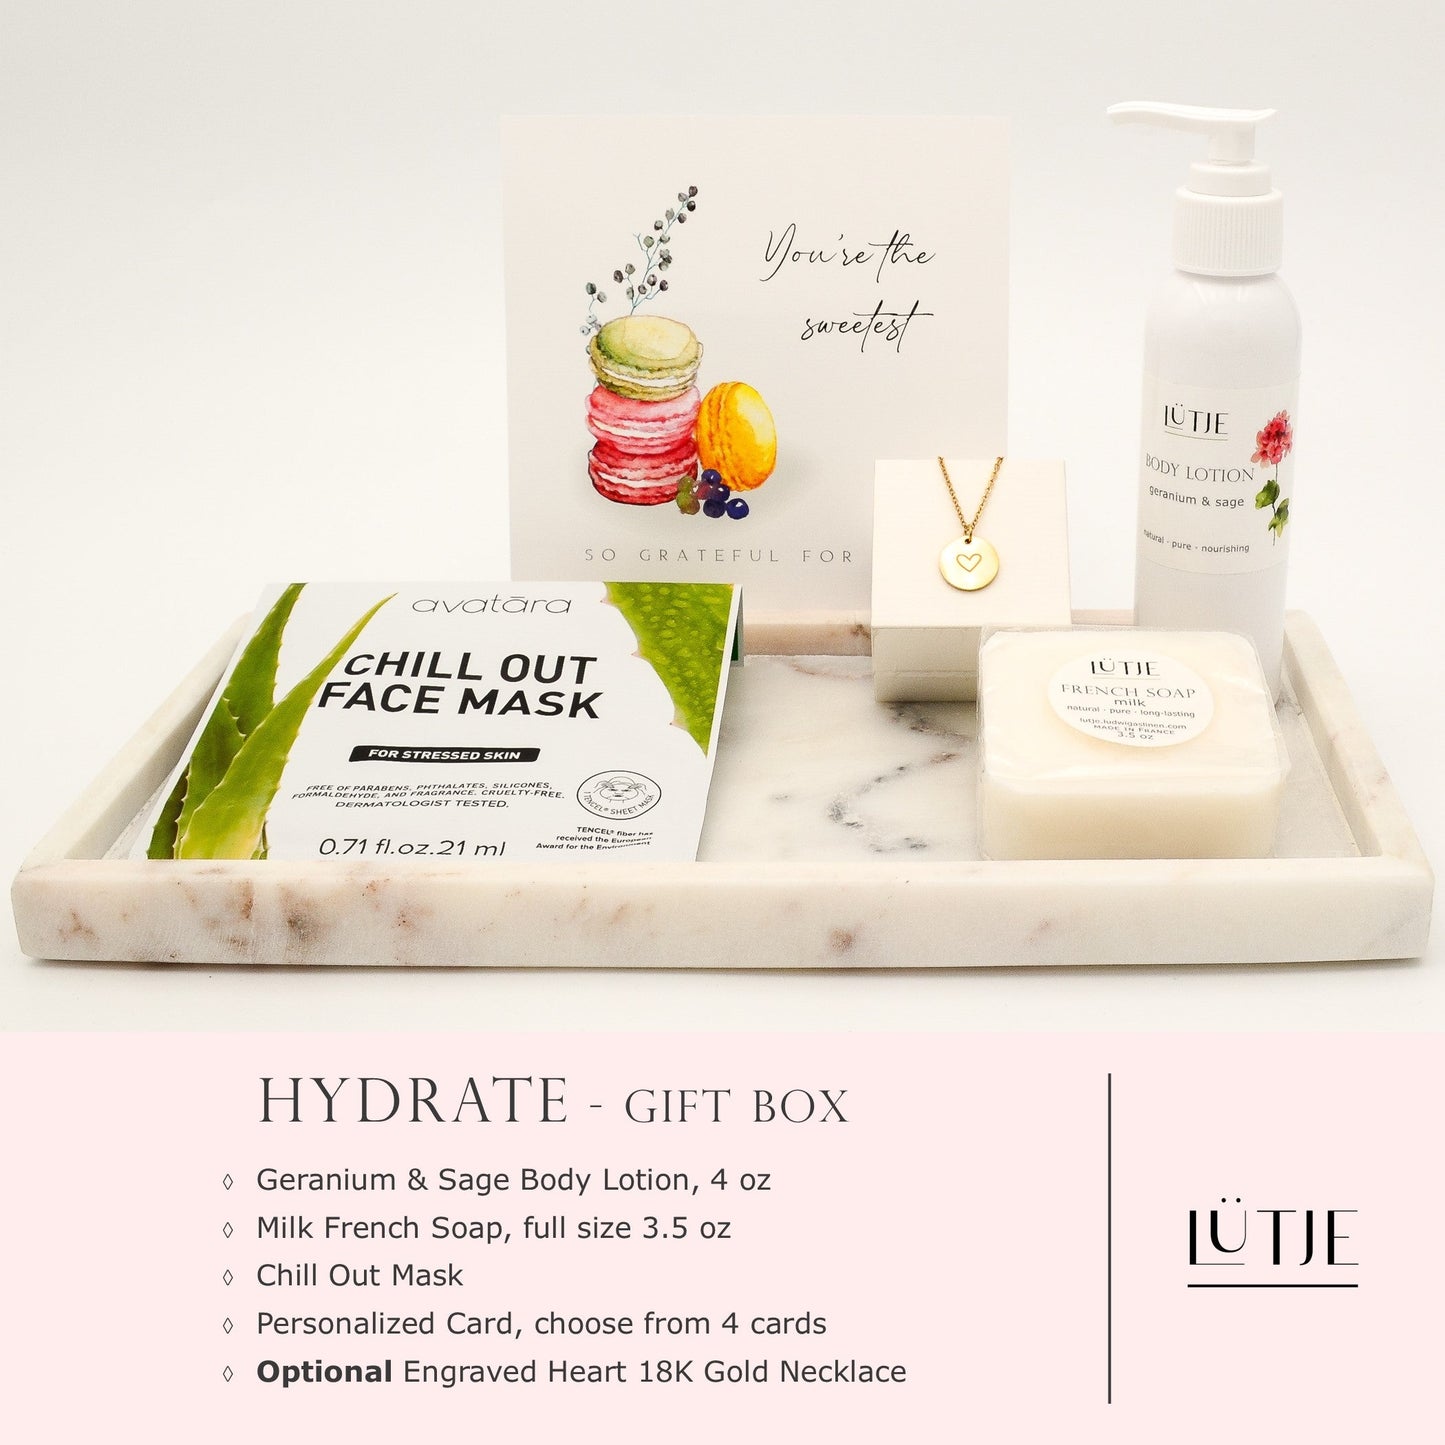 Hydrate Gift Box for women, daughter, mom, BFF, wife, sister or grandma, includes Geranium & Sage body lotion, French soap, hydrating face mask, and 18K gold-plated necklace with engraved heart.